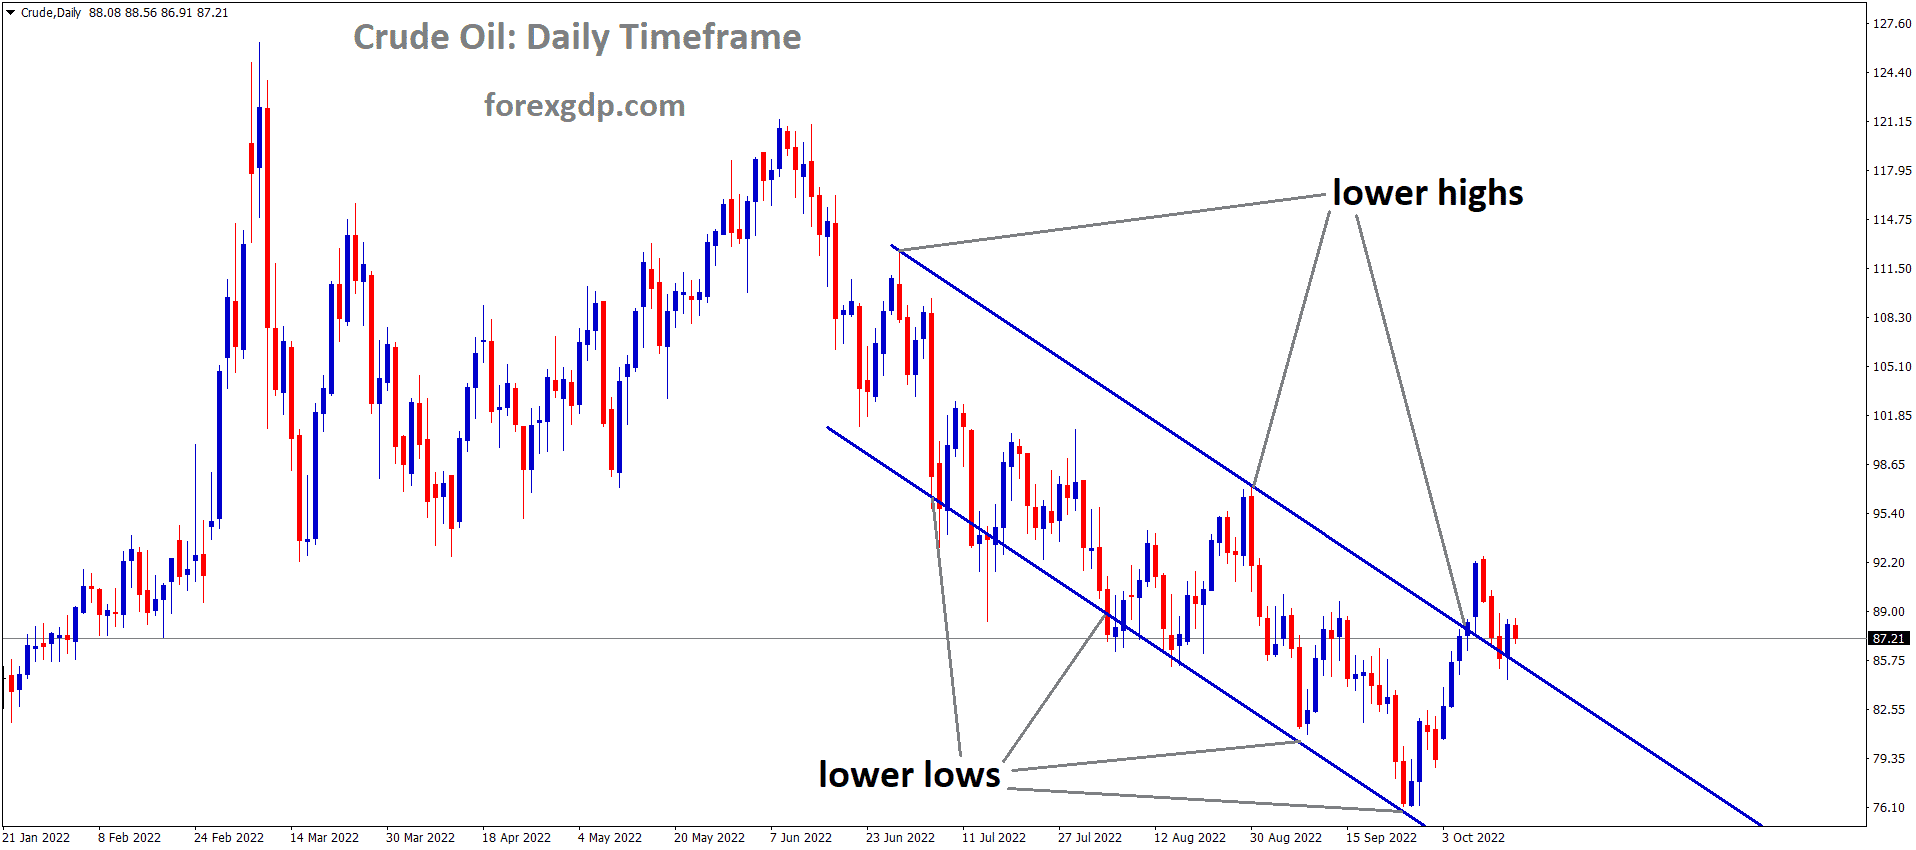 Crude Oil is moving in the Descending channel and the market has reached the Lower high area of the channel 3